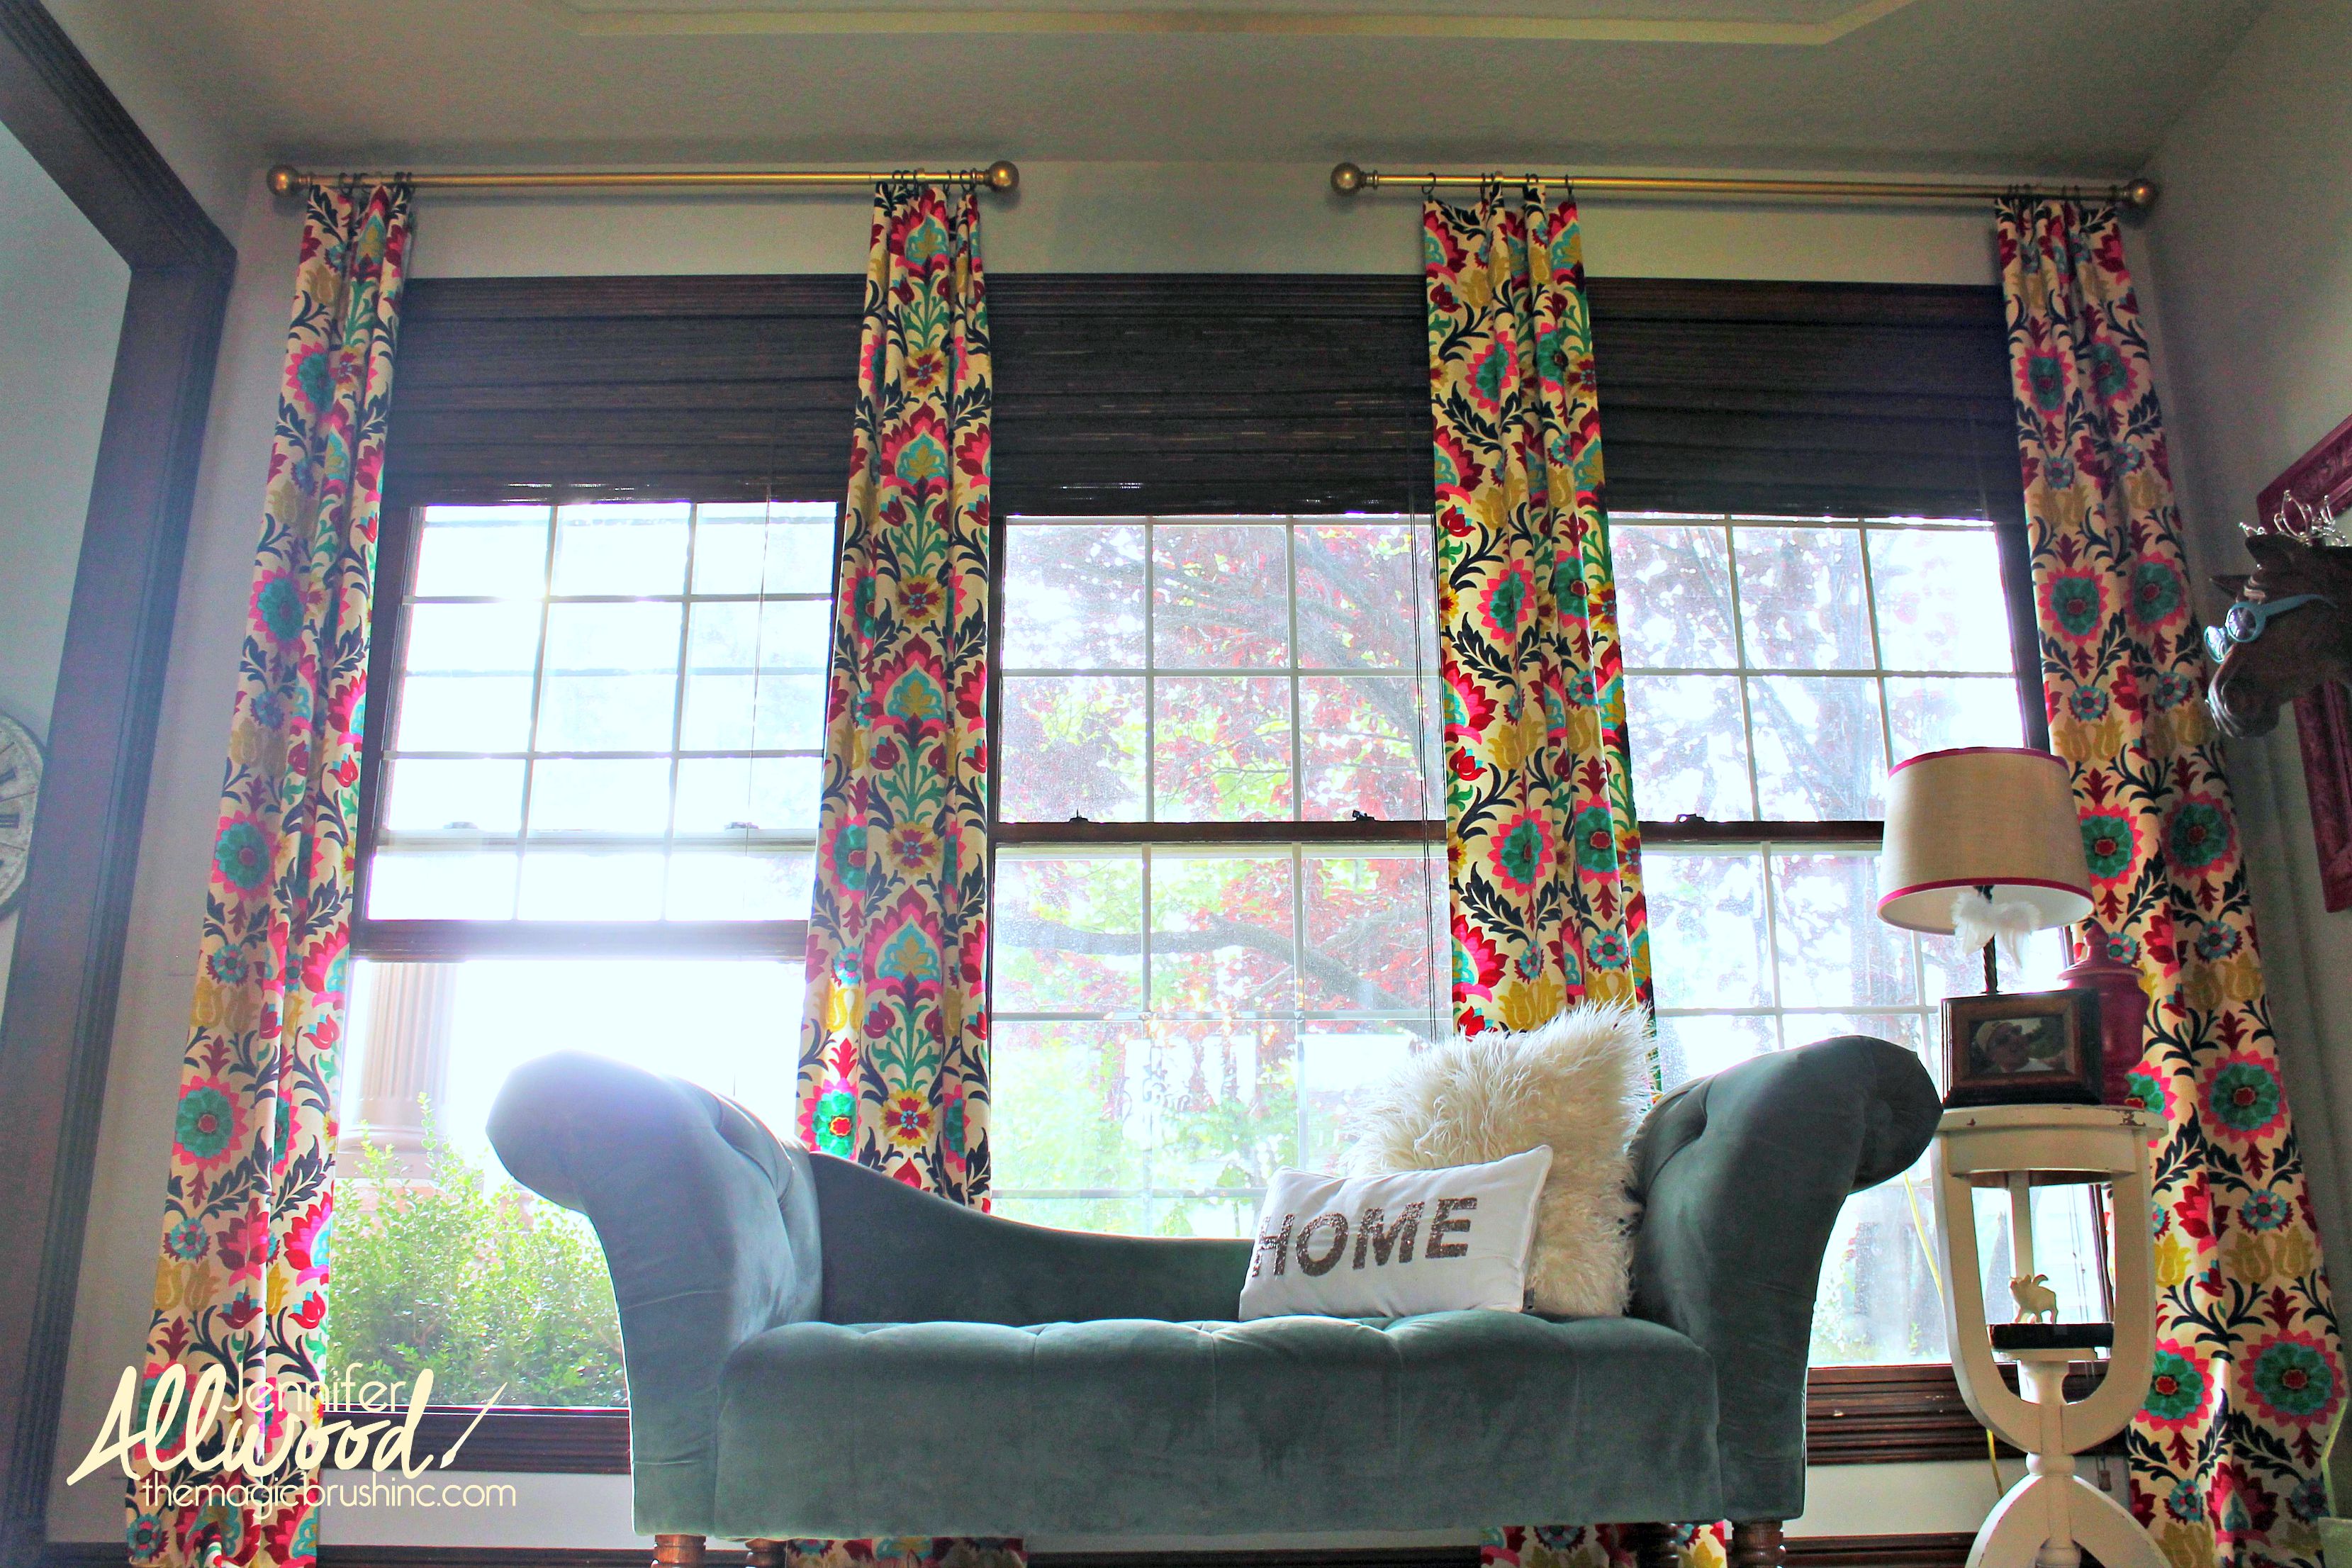 The HAPPIEST DIY office curtains in the world…. made by the girl who CAN’T SEW